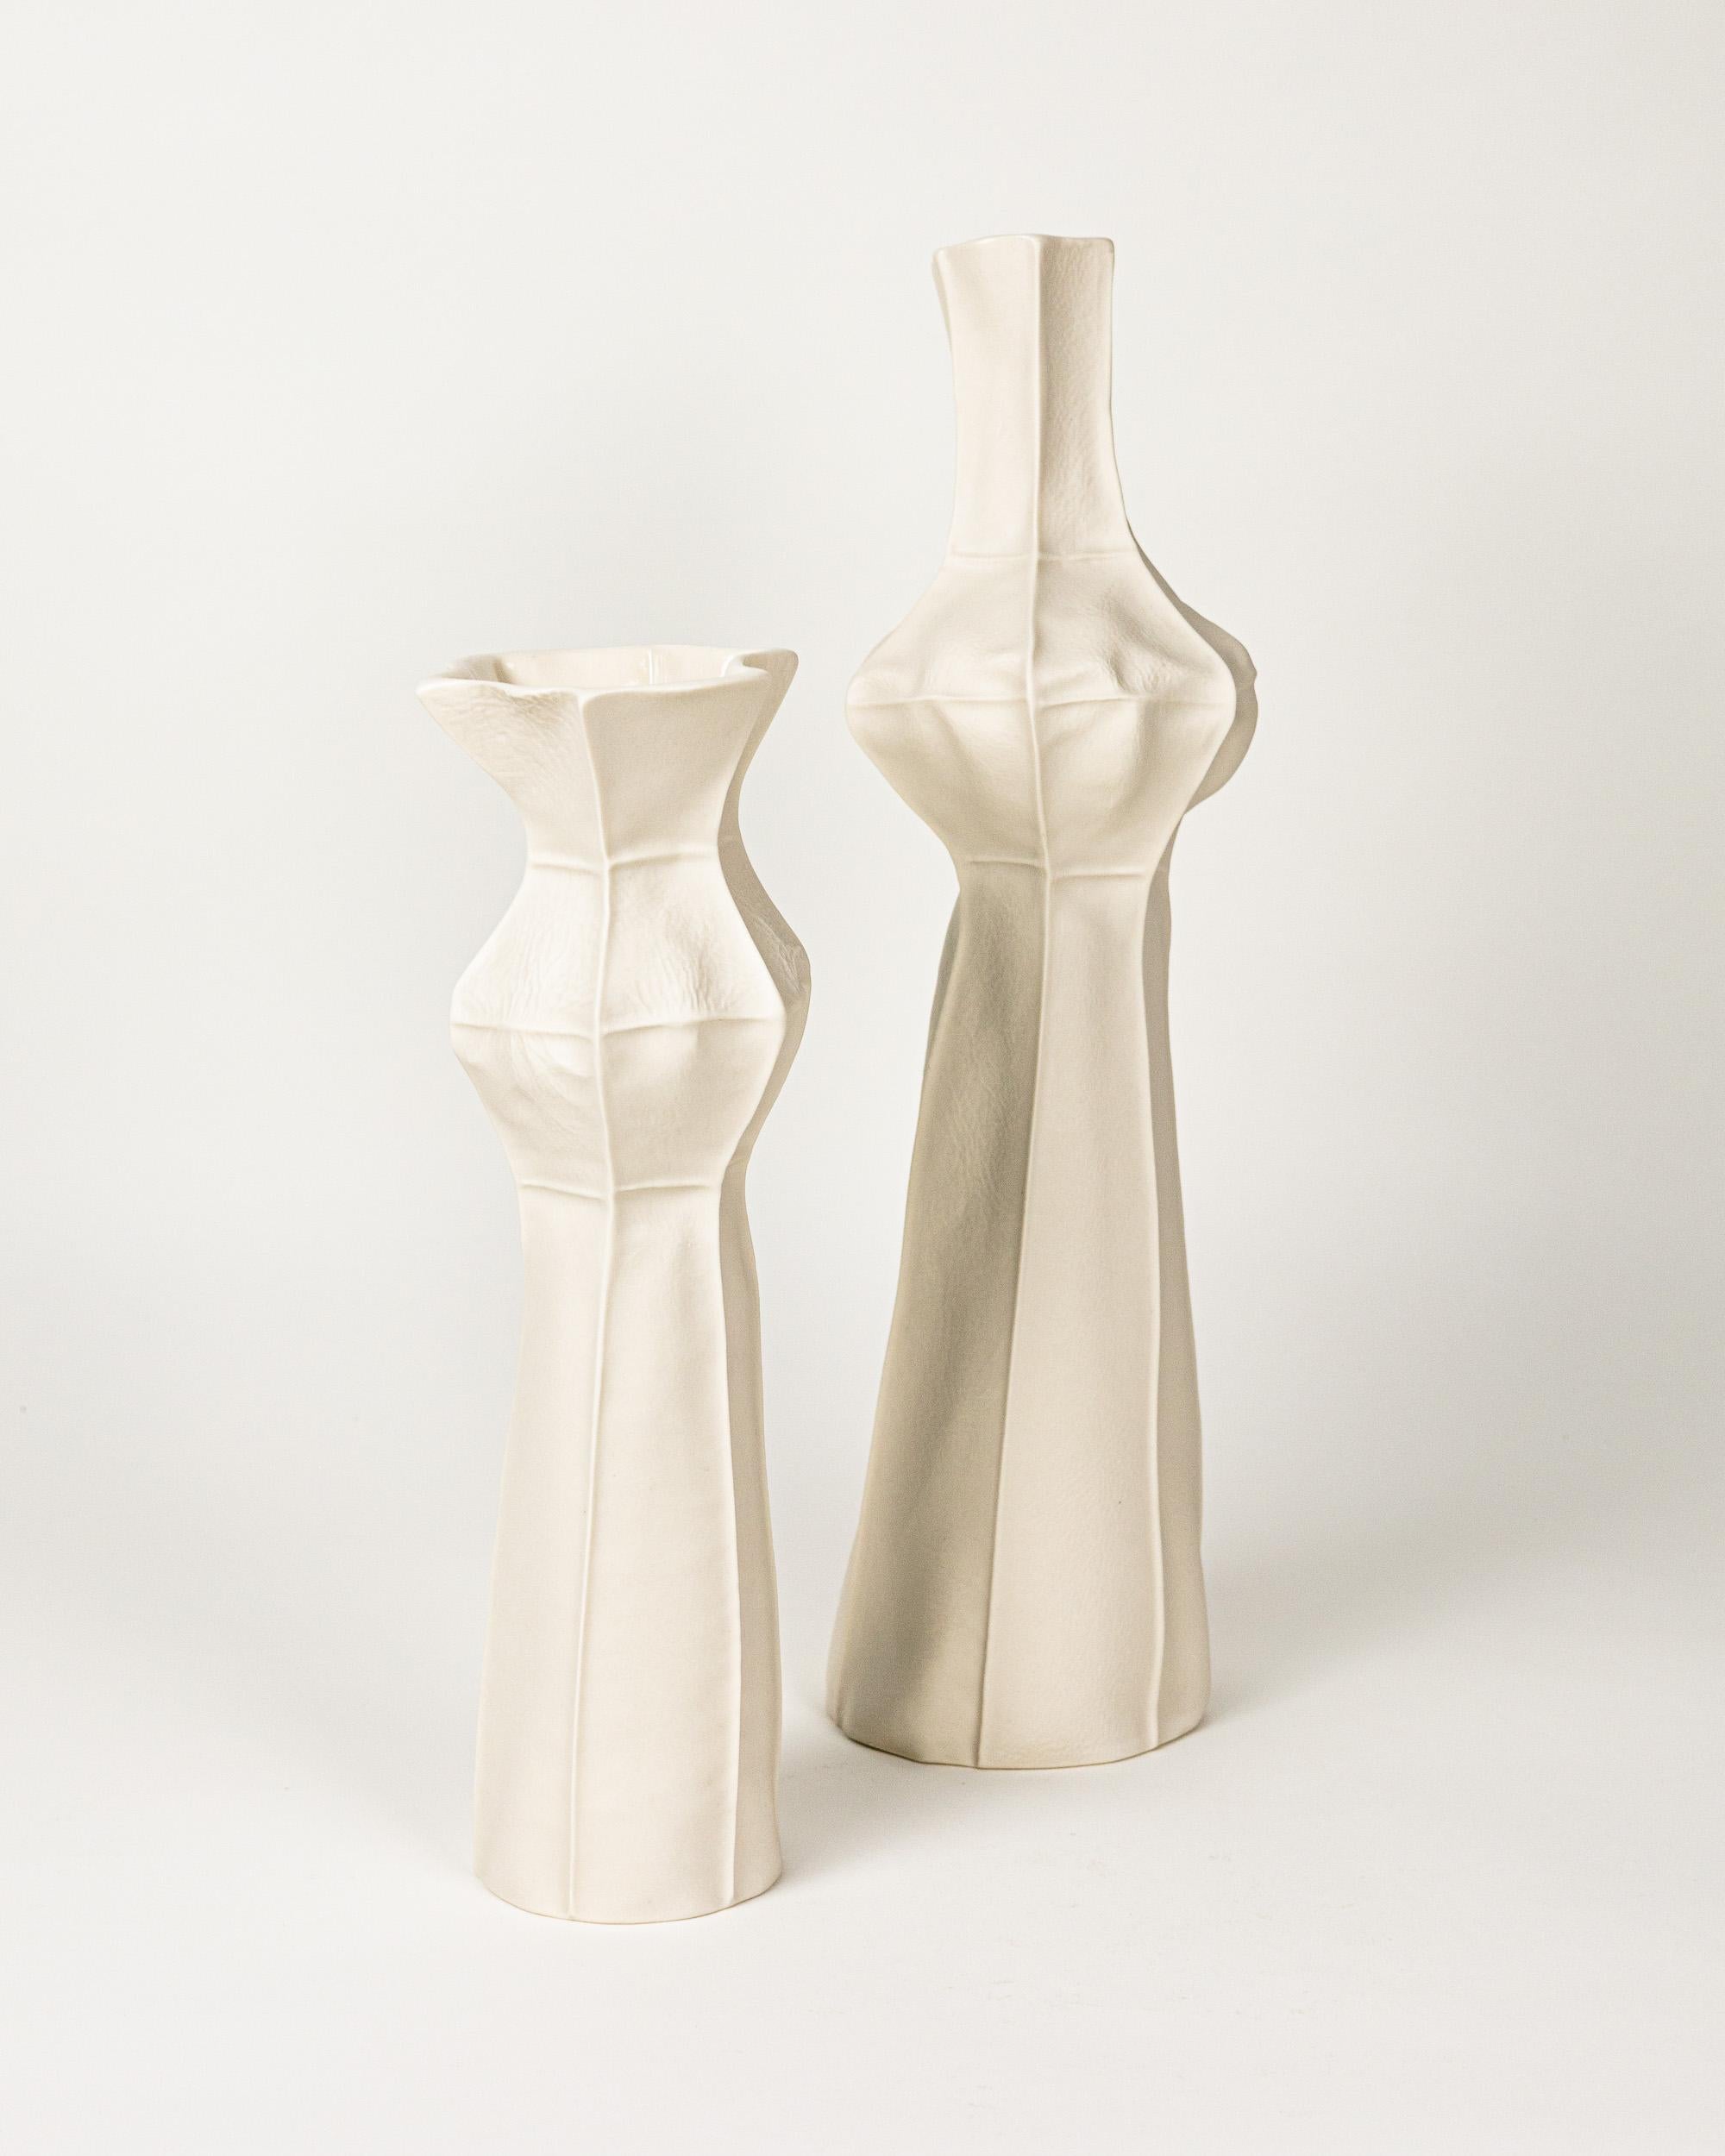 Hand-Crafted Pair of Tall White Ceramic Kawa Vases, Leather cast Porcelain, Organic For Sale